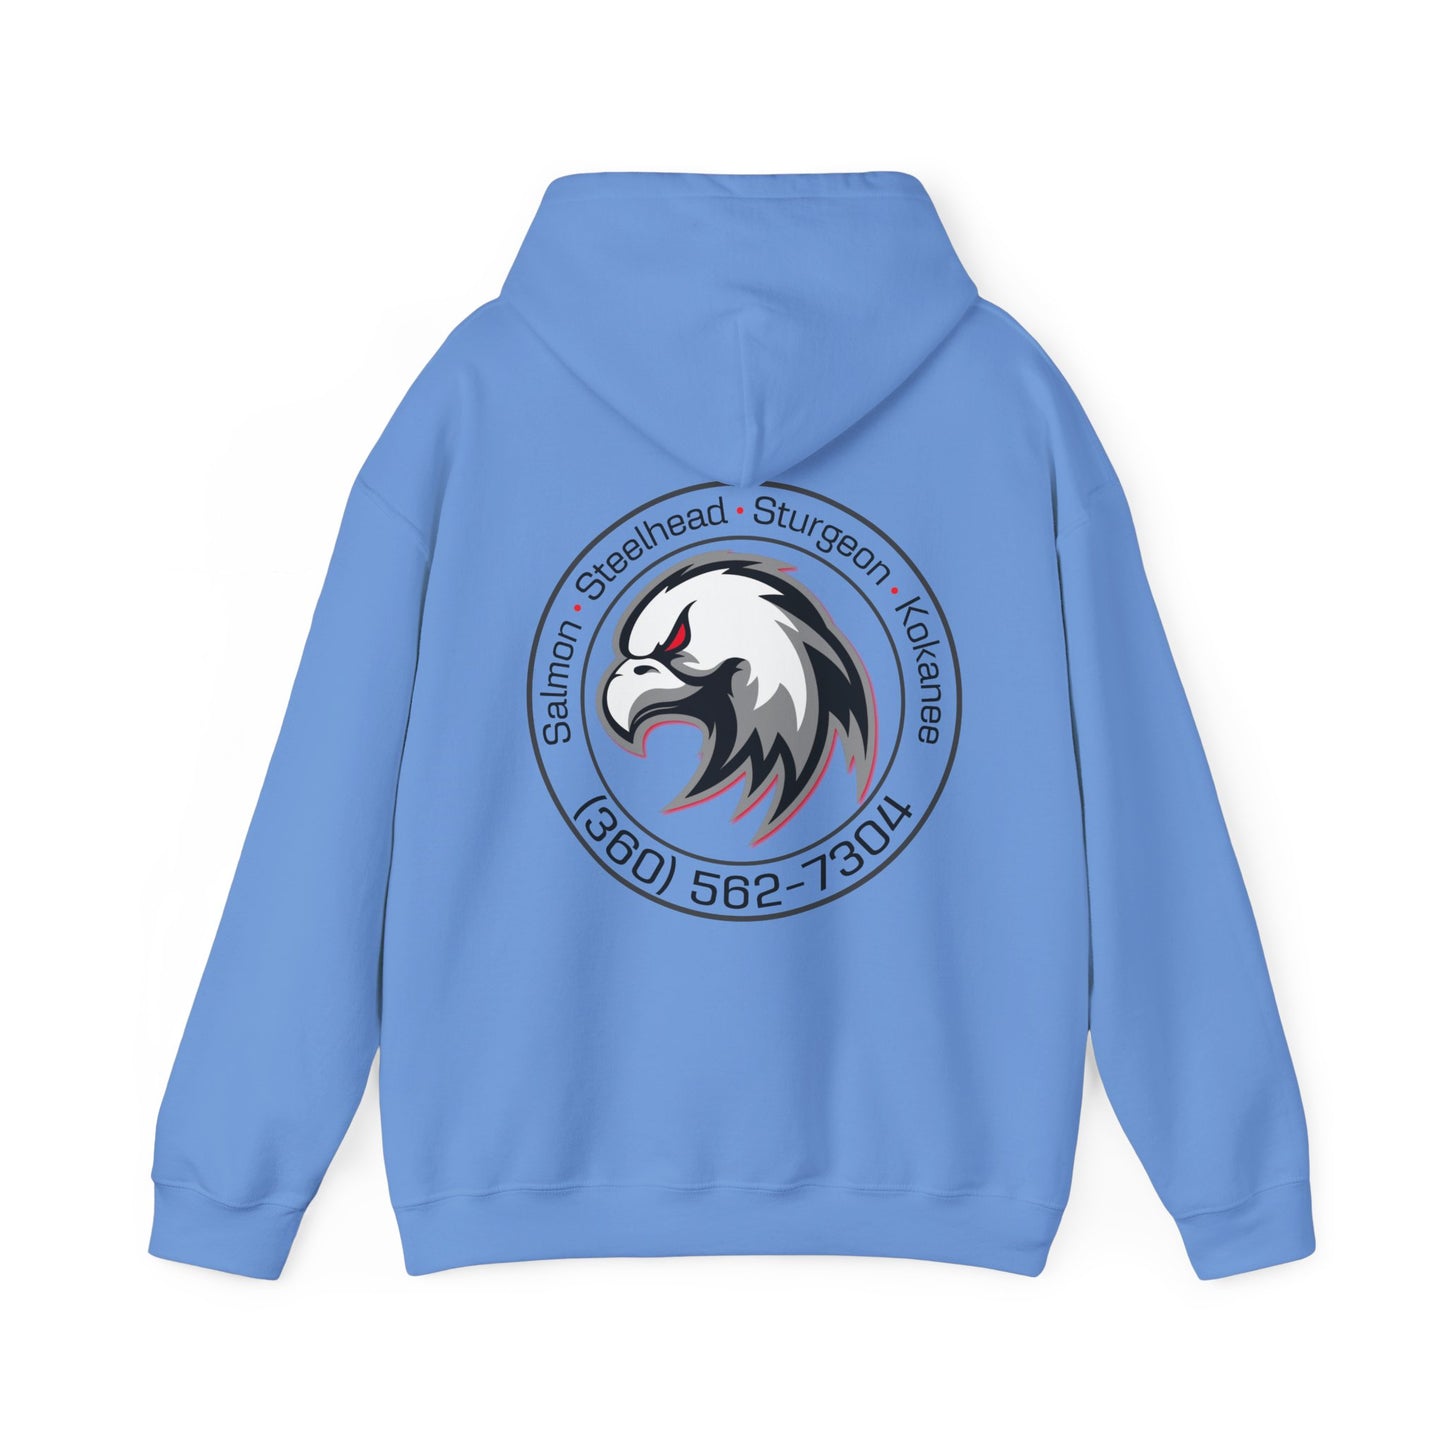 Full Tilt Outdoors - Angry Eagle - Cotton/Poly Blend Hoodie (Light Colors)